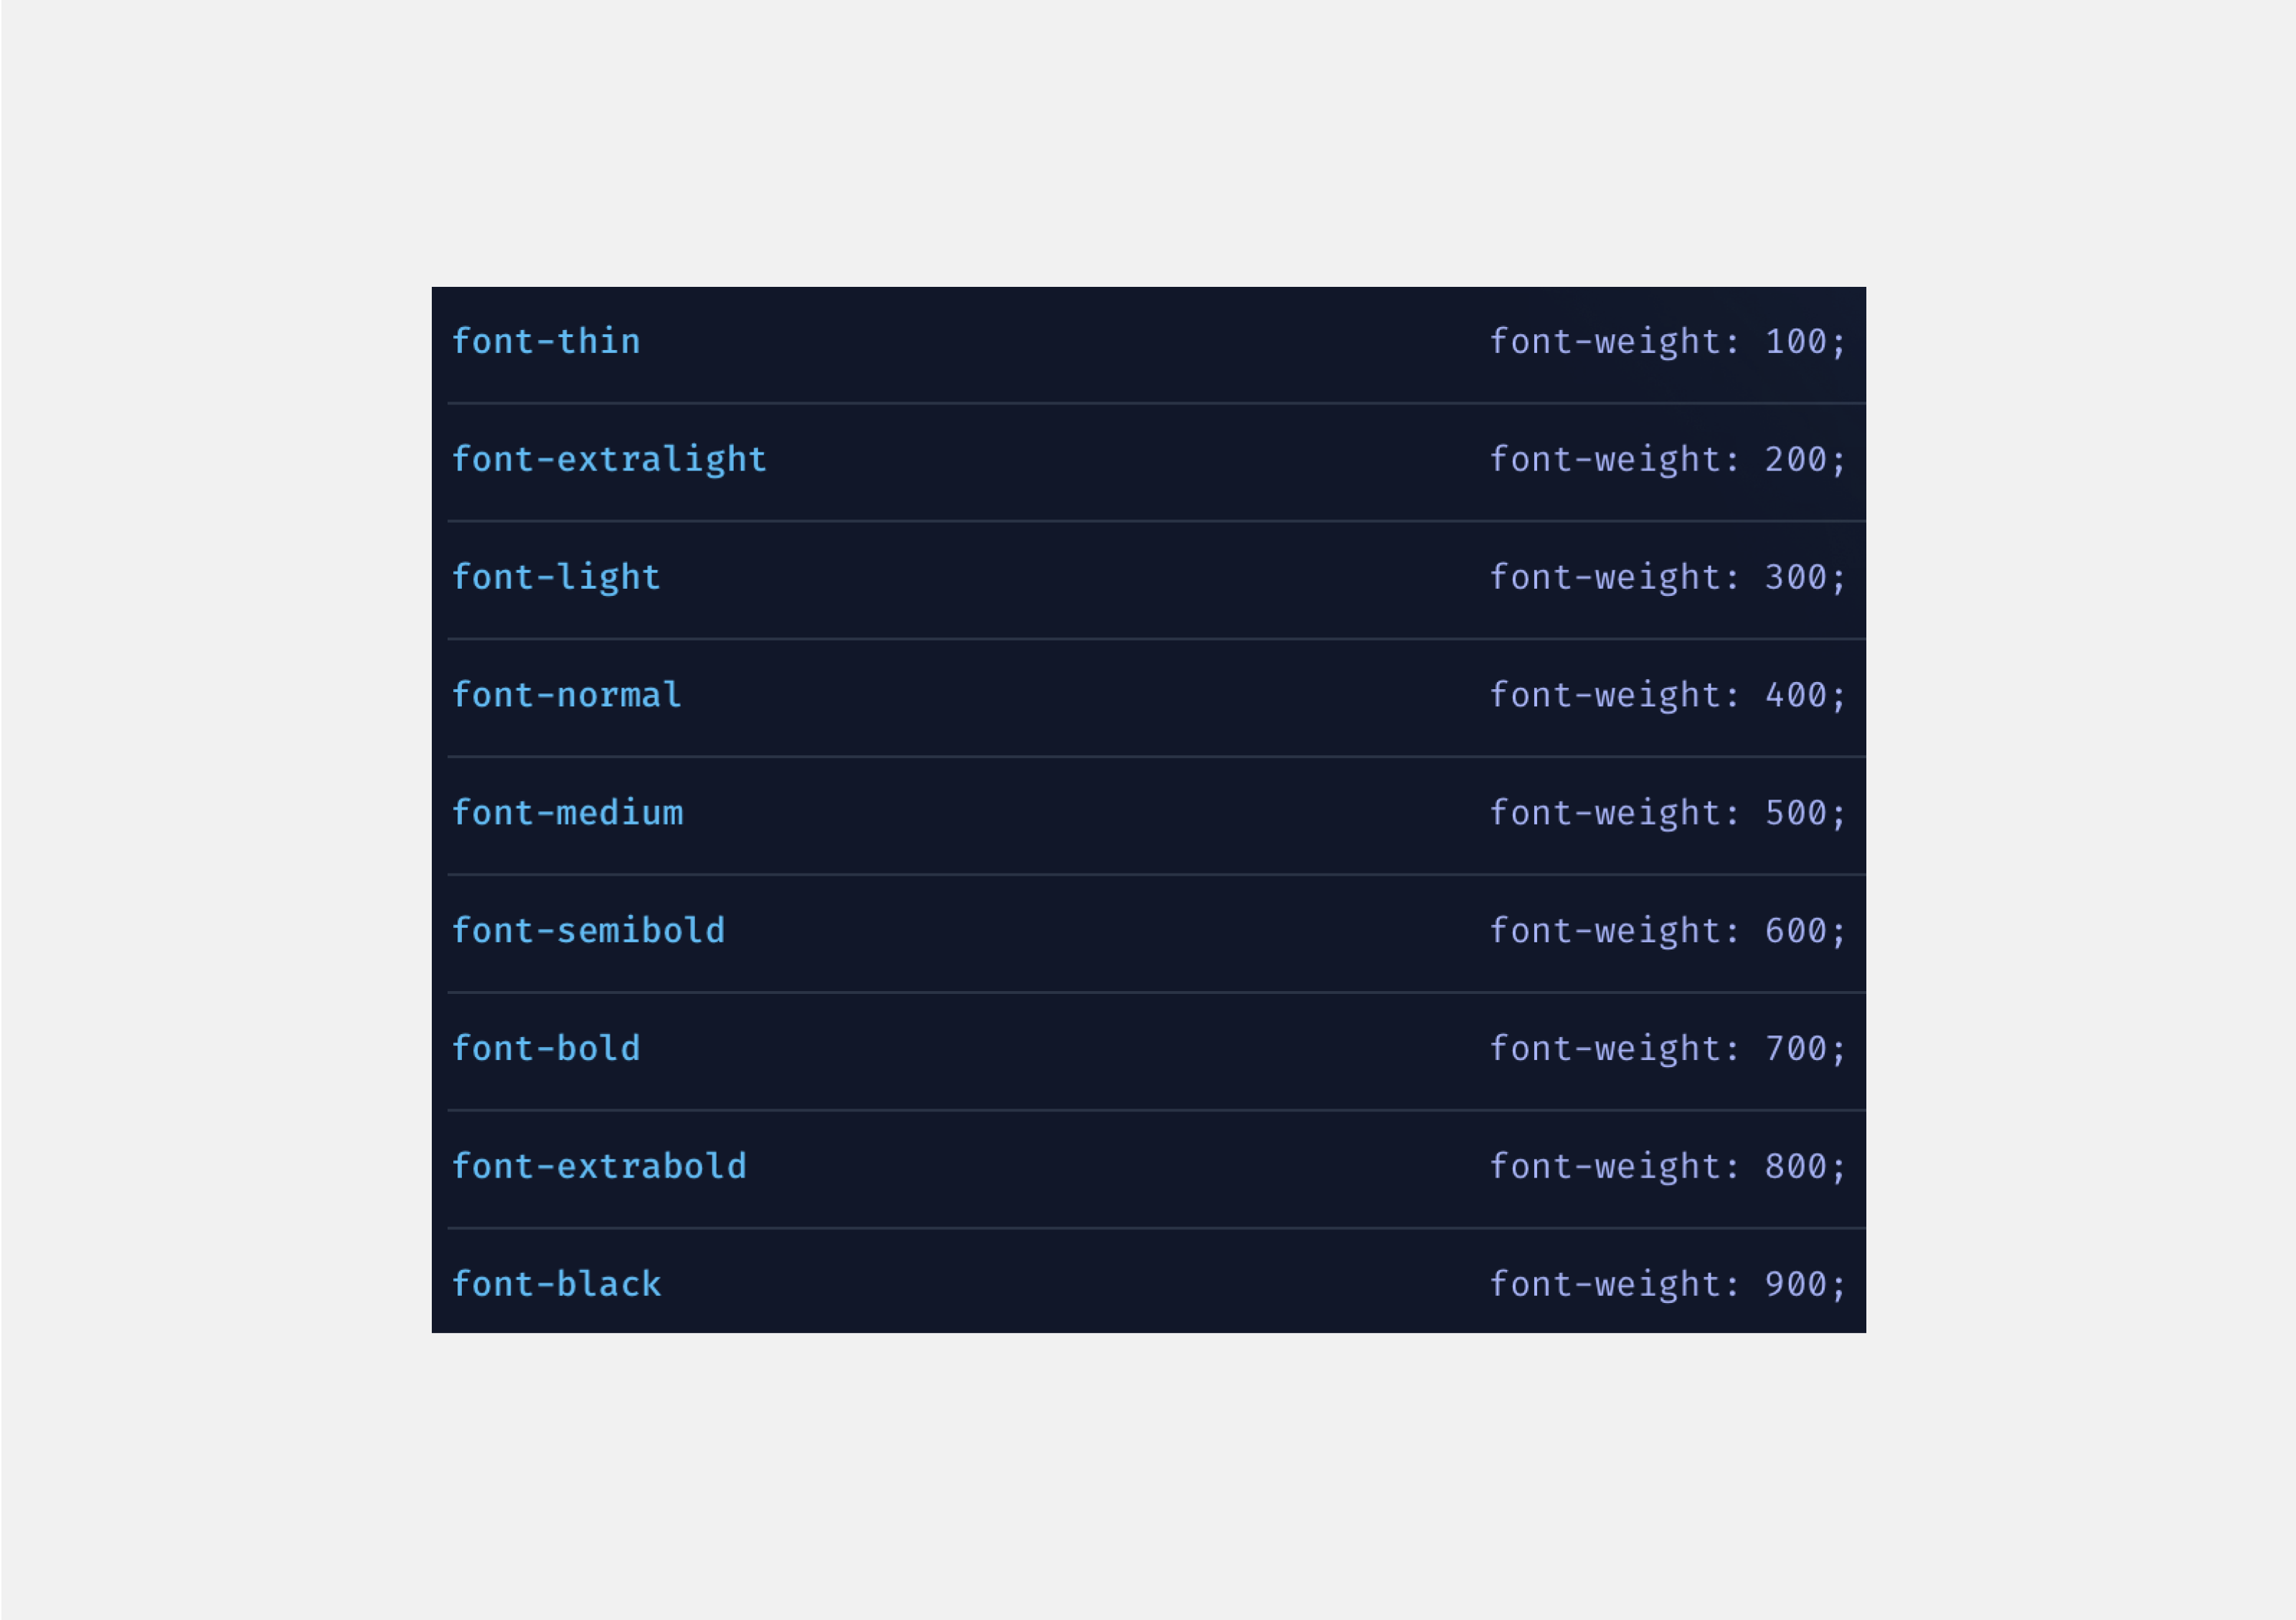 The image shows a list of Tailwind class names for font weights along with their values. Thin (font-thin): font-weight: 100; Very light (font-extralight): font-weight: 200; Light (font-light): font-weight: 300; Normal (font-normal): font-weight: 400; Medium (font-medium): font-weight: 500; Semi-thick (font-semibold): font-weight: 600; Thick (font-bold): font-weight: 700; Very thick (font-extrabold): font-weight: 800; Black (font-black): font-weight: 900;